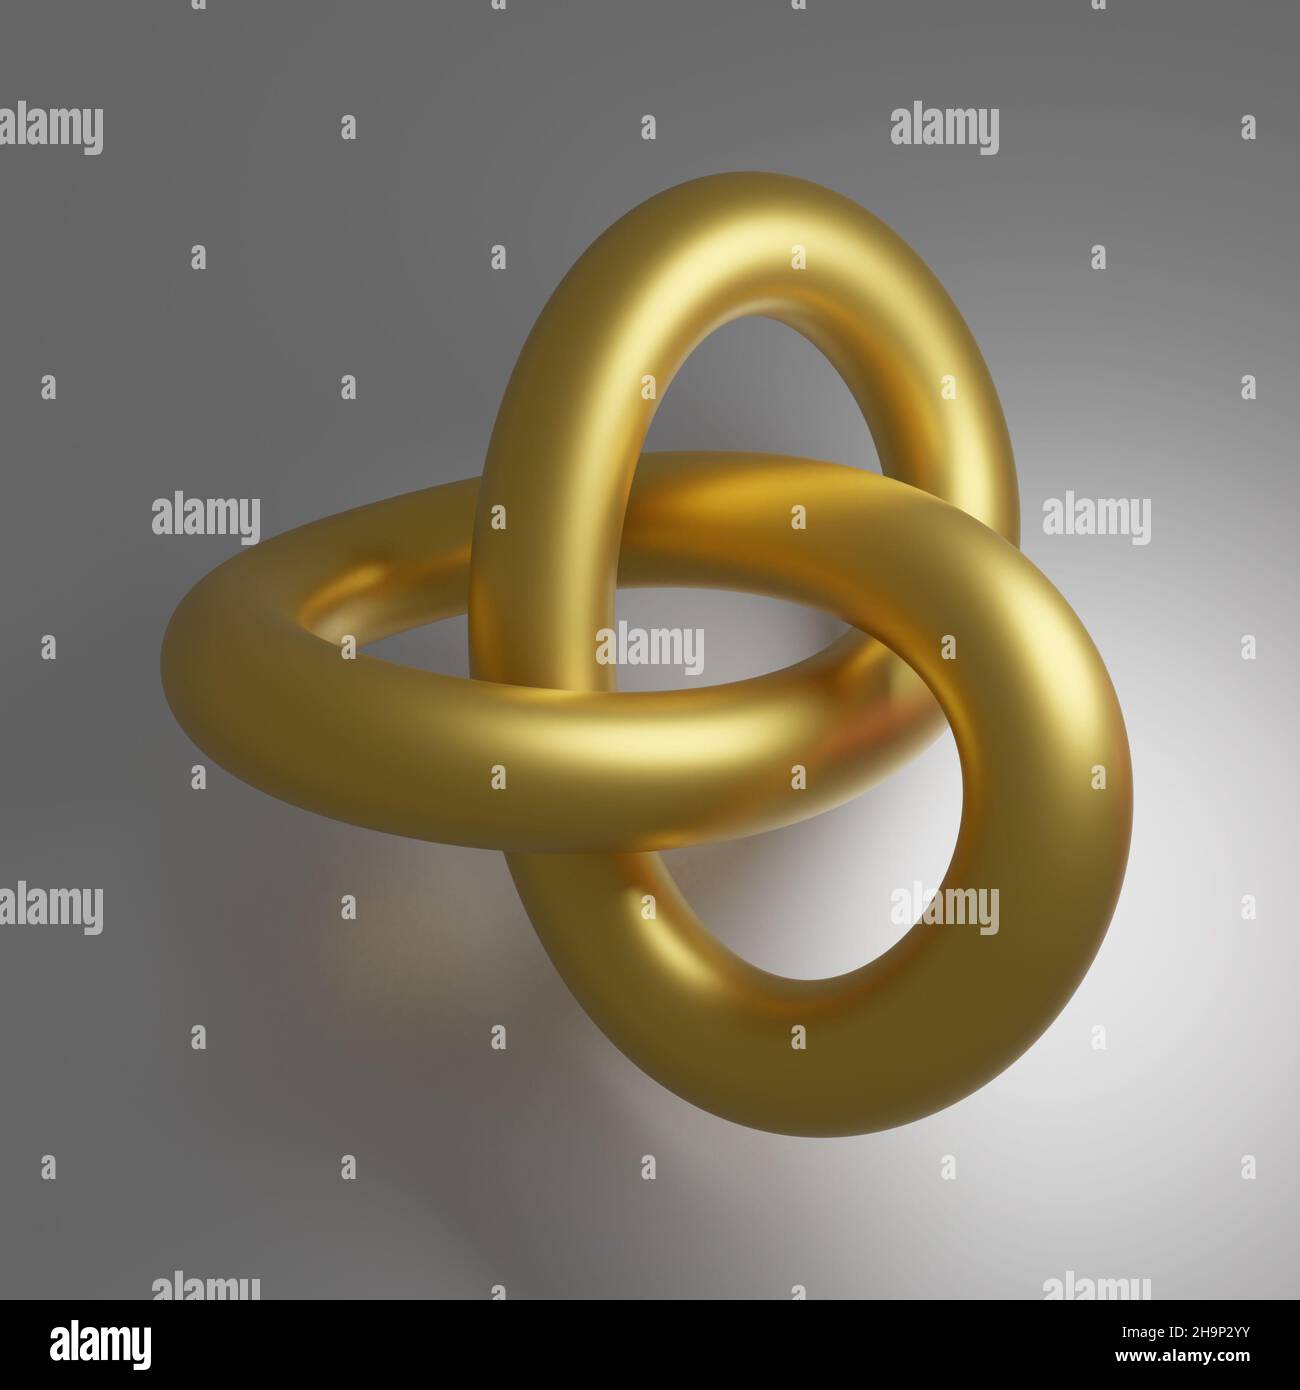 A gold wire tied in a knot on a gray background. A shiny torus of yellow color, tied in an endless knot. 3D render. Stock Photo